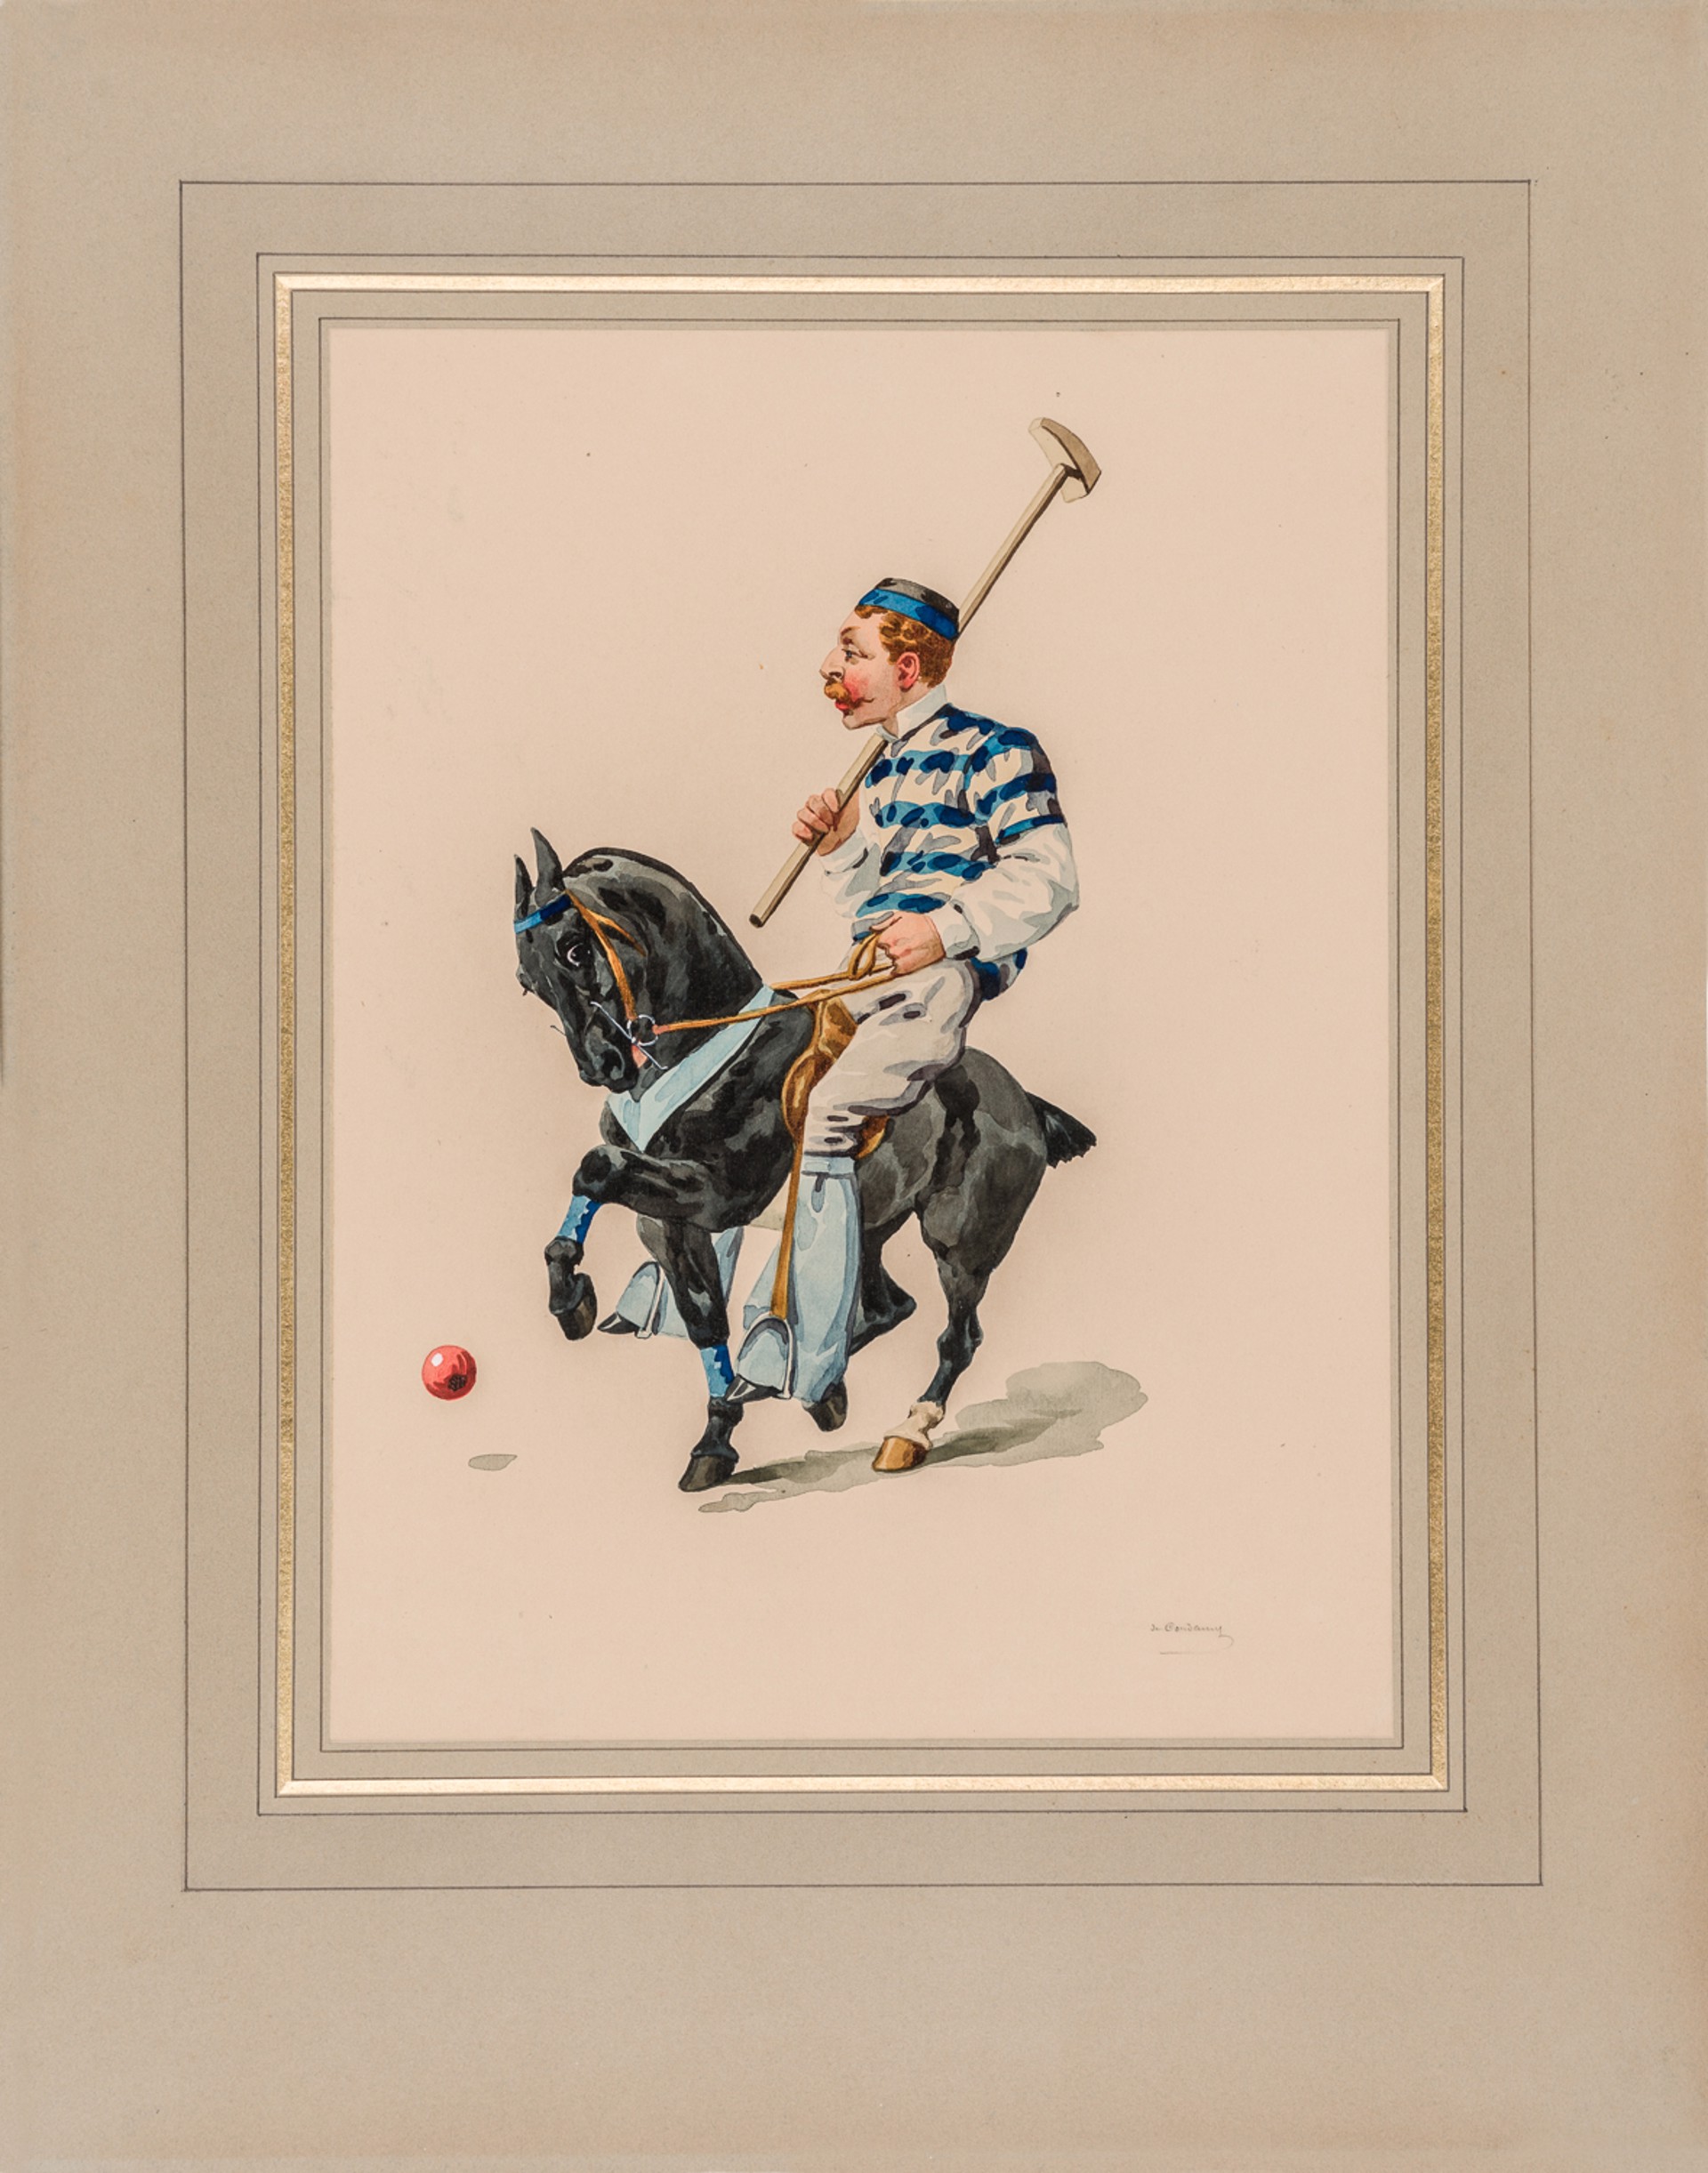 POLO INCIDENTS (set of 4) by Charles-Fernand de Condamy